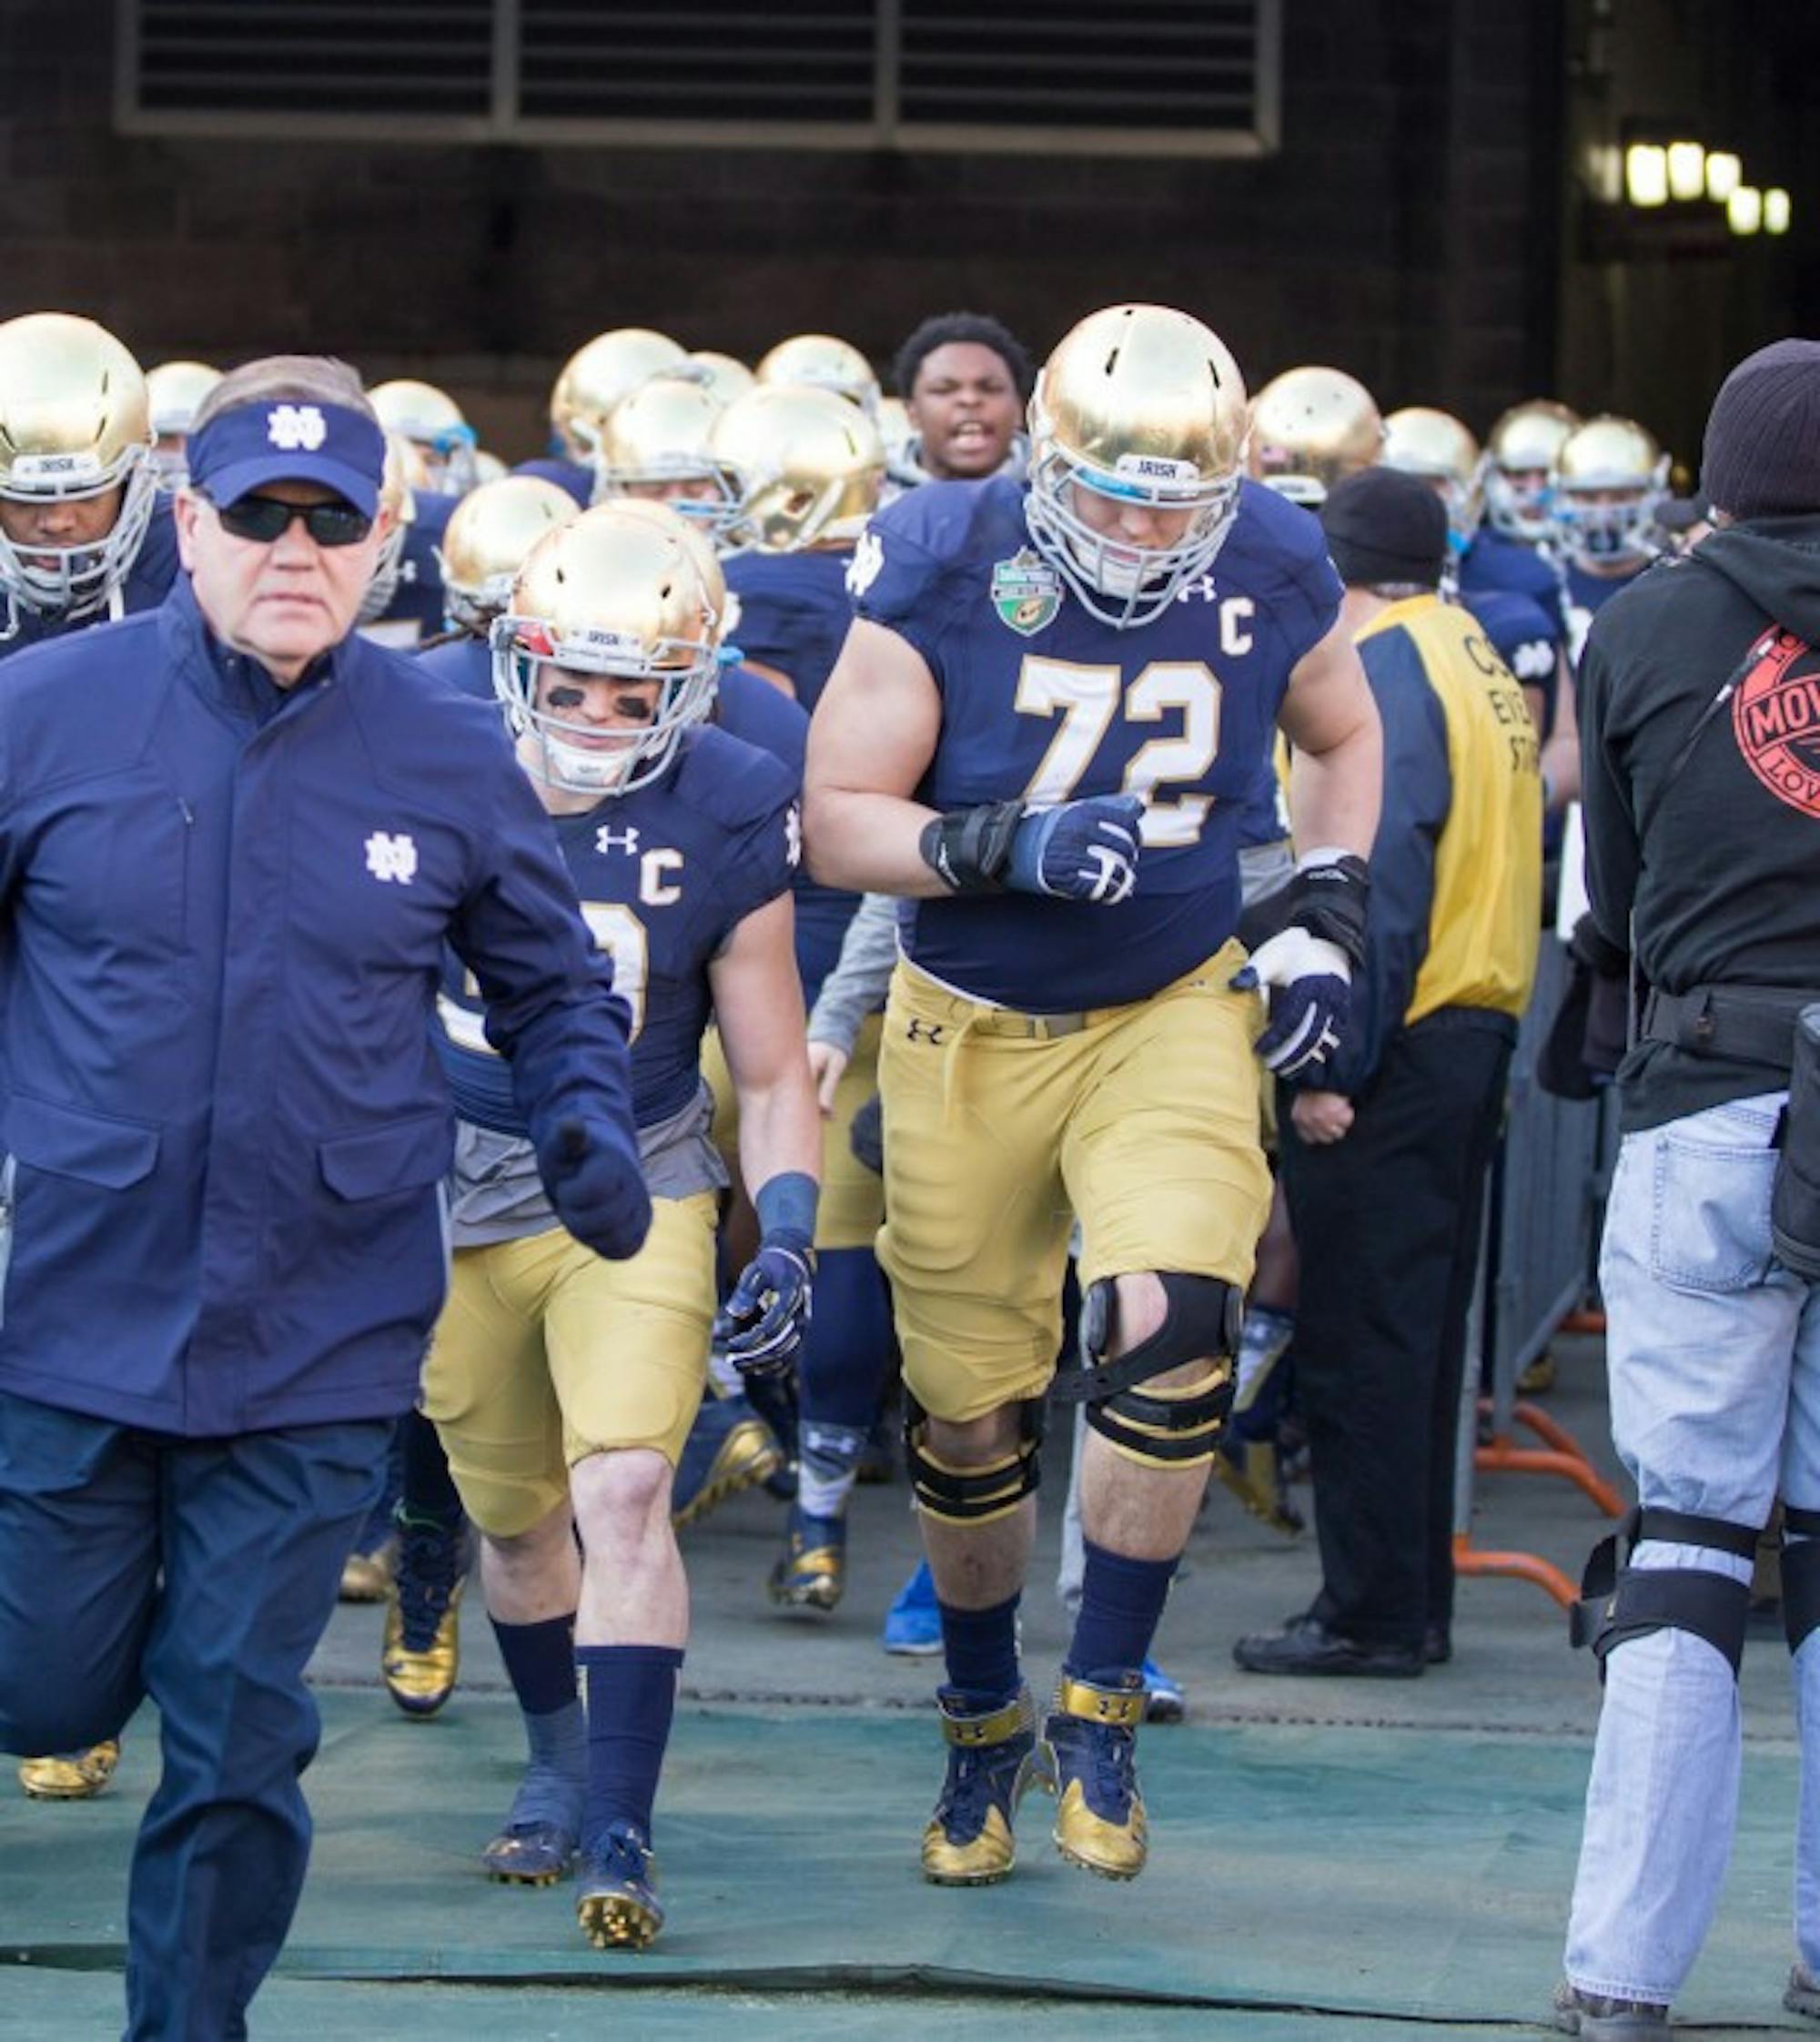 Graduate student center Nick Martin, 72, leads Notre Dame out of the tunnel before its 31-28 win in the Music City Bowl on Dec. 30.